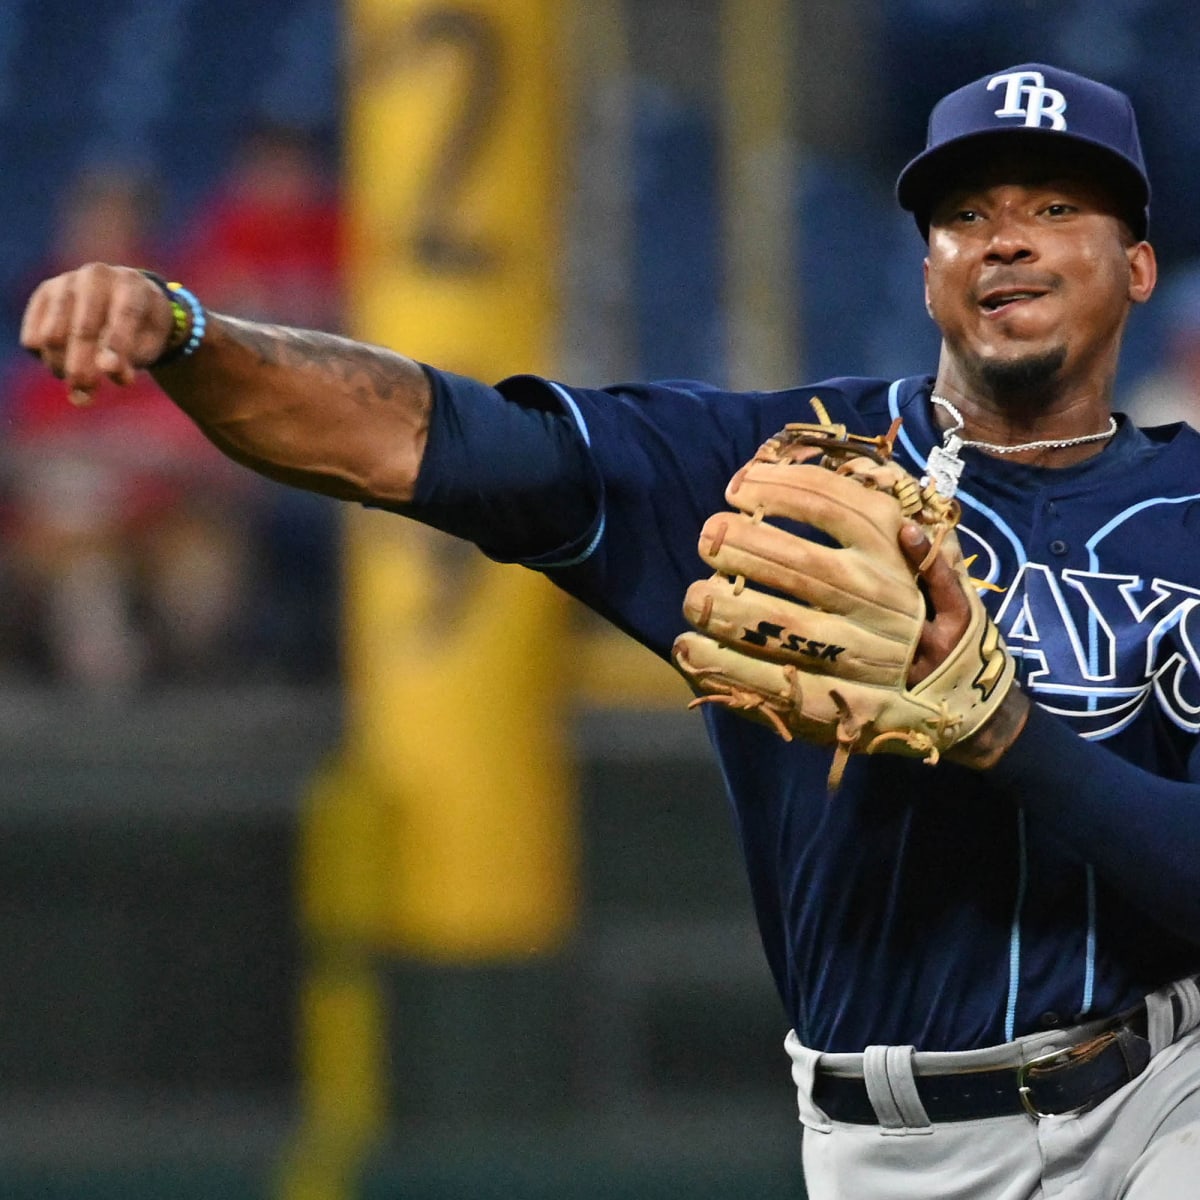 Rays to sign Wander Franco to 12-year contract - DRaysBay